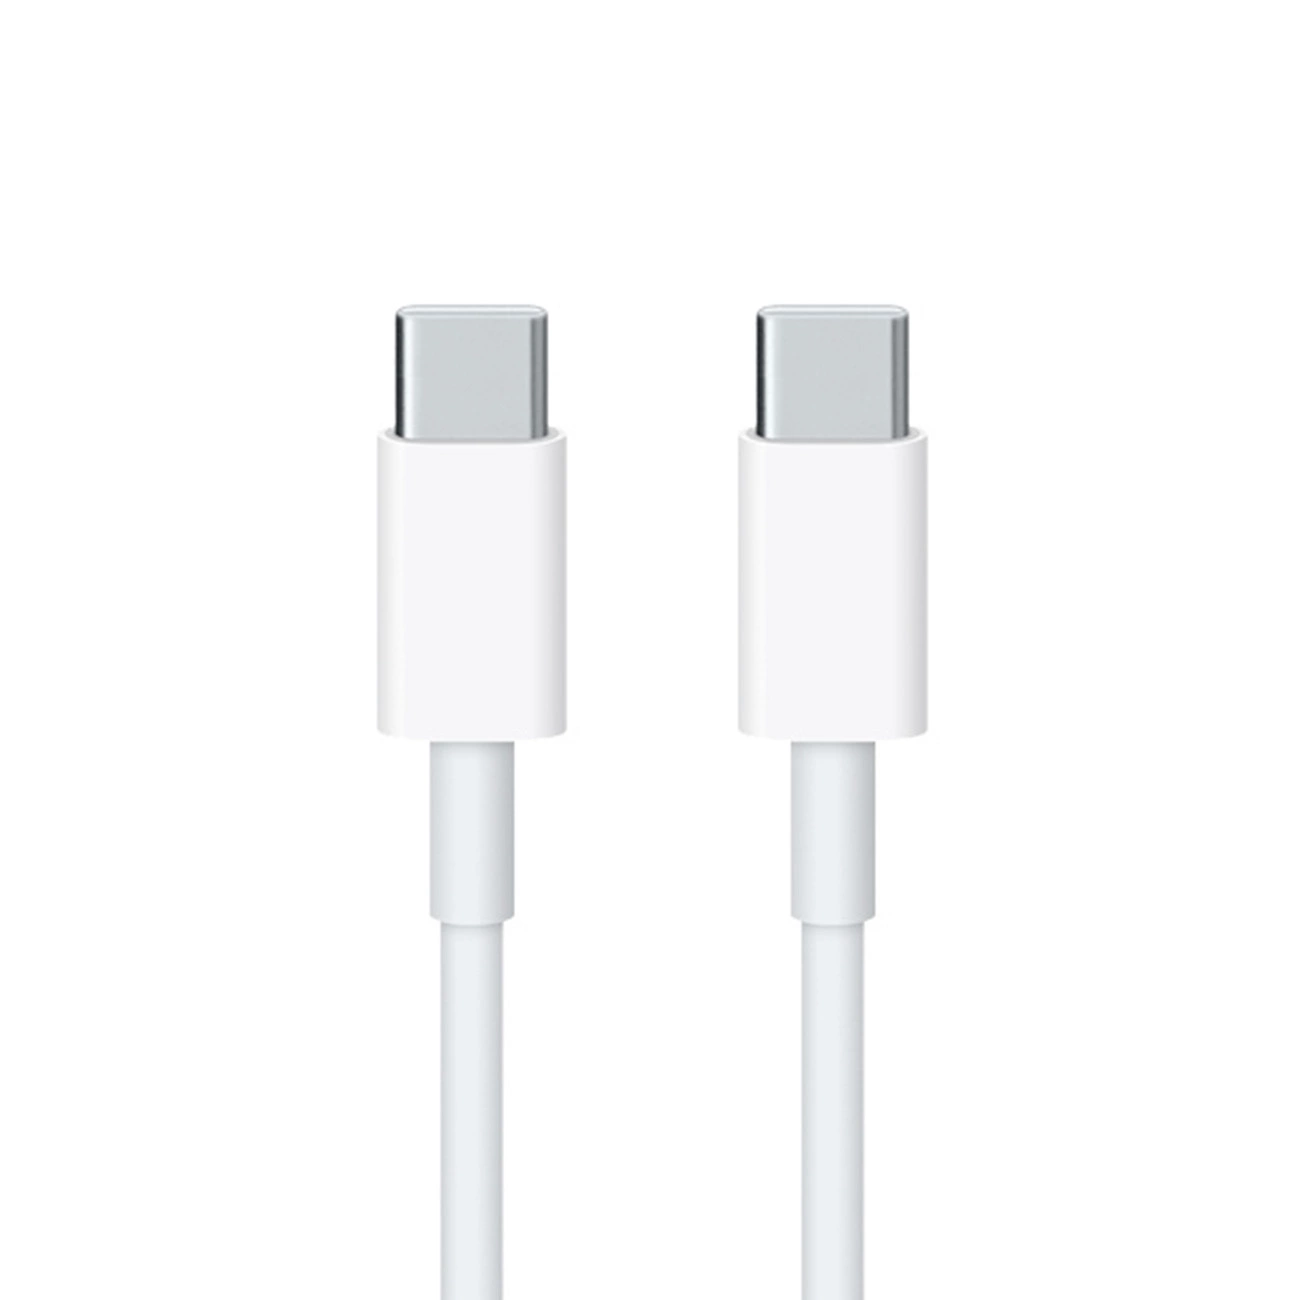 Kabel USB Apple MLL82ZM/A Typ-C na Typ-C 2m biay T-Mobile T Phone 5G